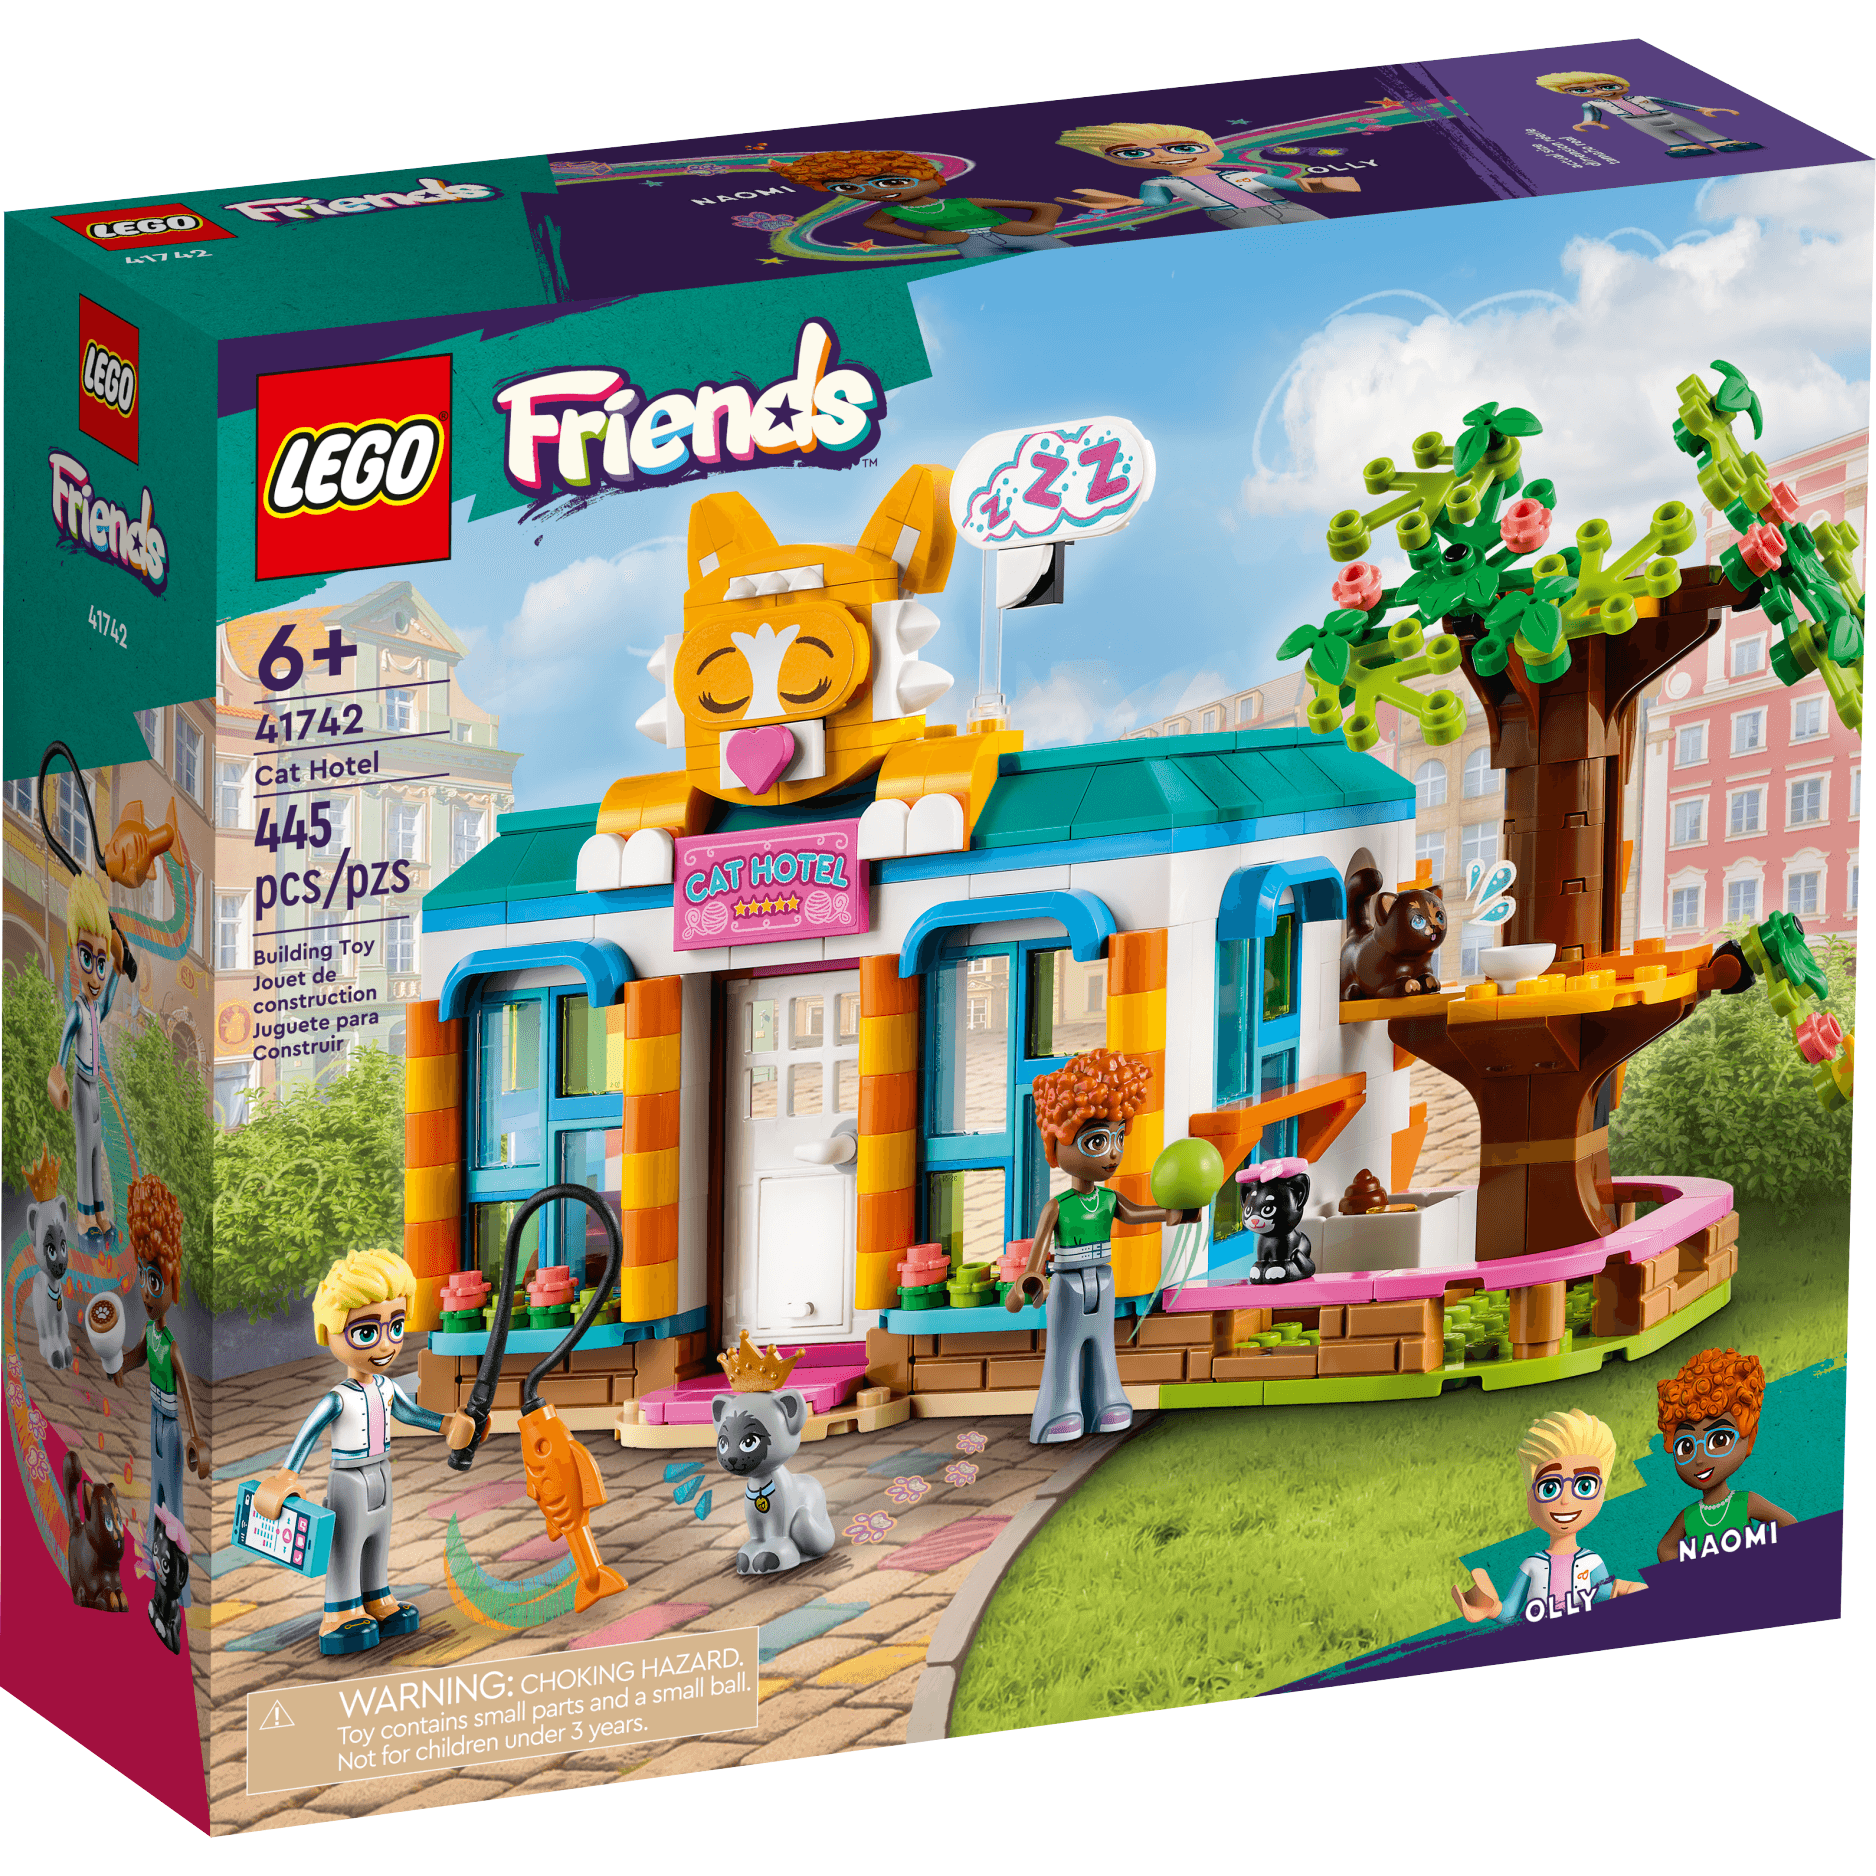 LEGO 41742 Friends Cat Hotel - BumbleToys - 5-7 Years, 6+ Years, Friends, LEGO, Pre-Order